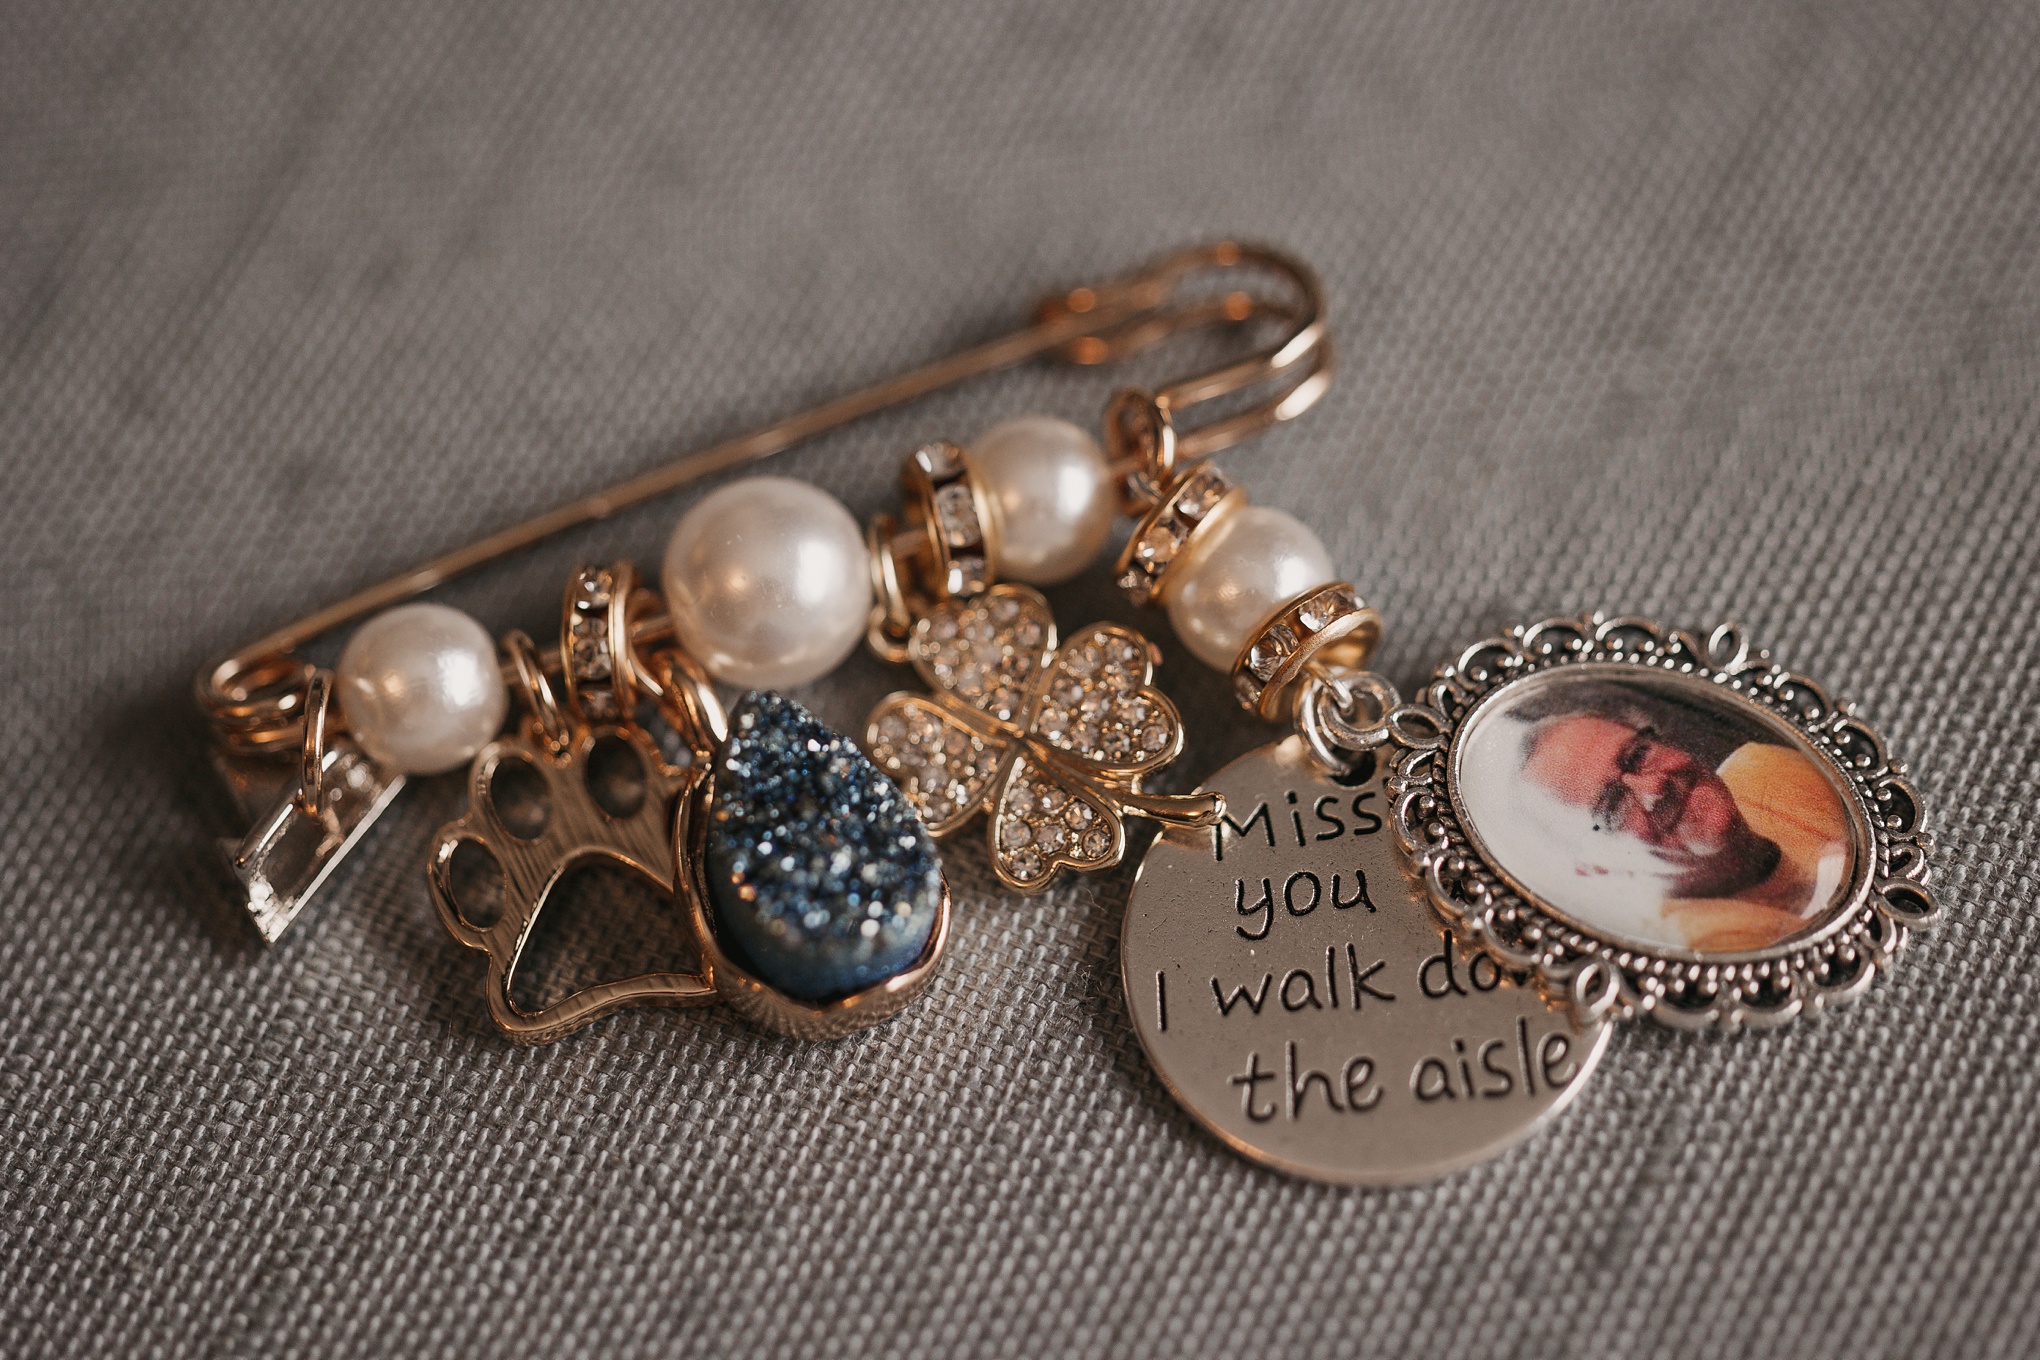 Wedding keepsake to remember father of the bride